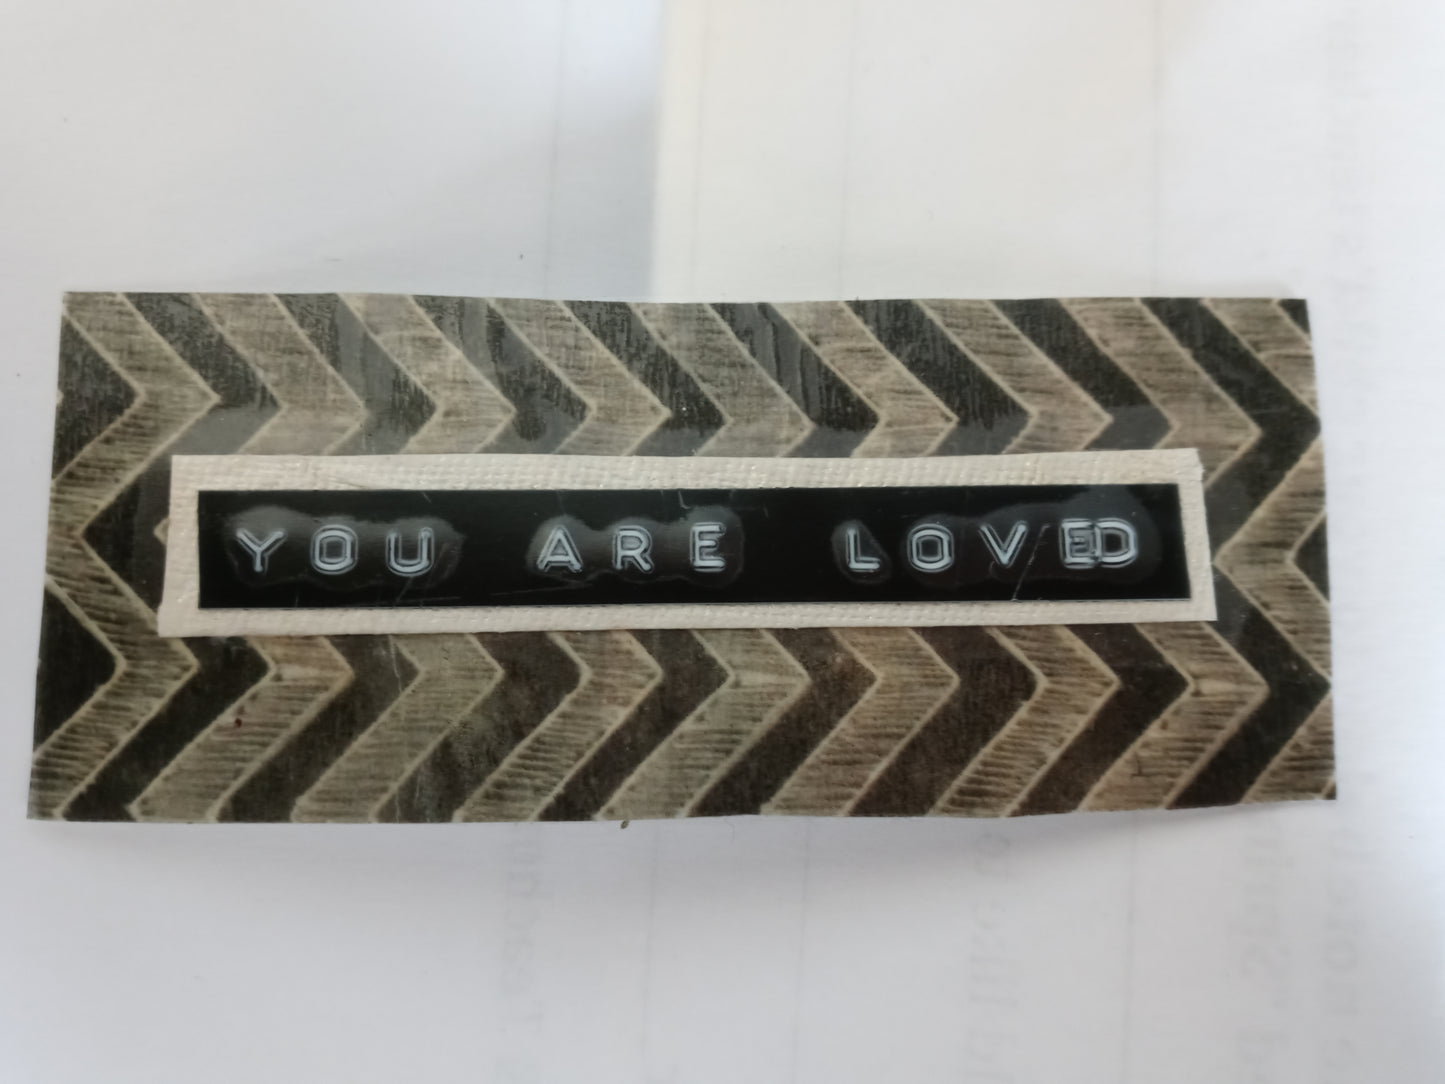 Handmade sticker with "YOU ARE LOVED" printed from a label maker centered on a beige rectangle, centered on an uneven black and beige zig zag patterned background rectangle.